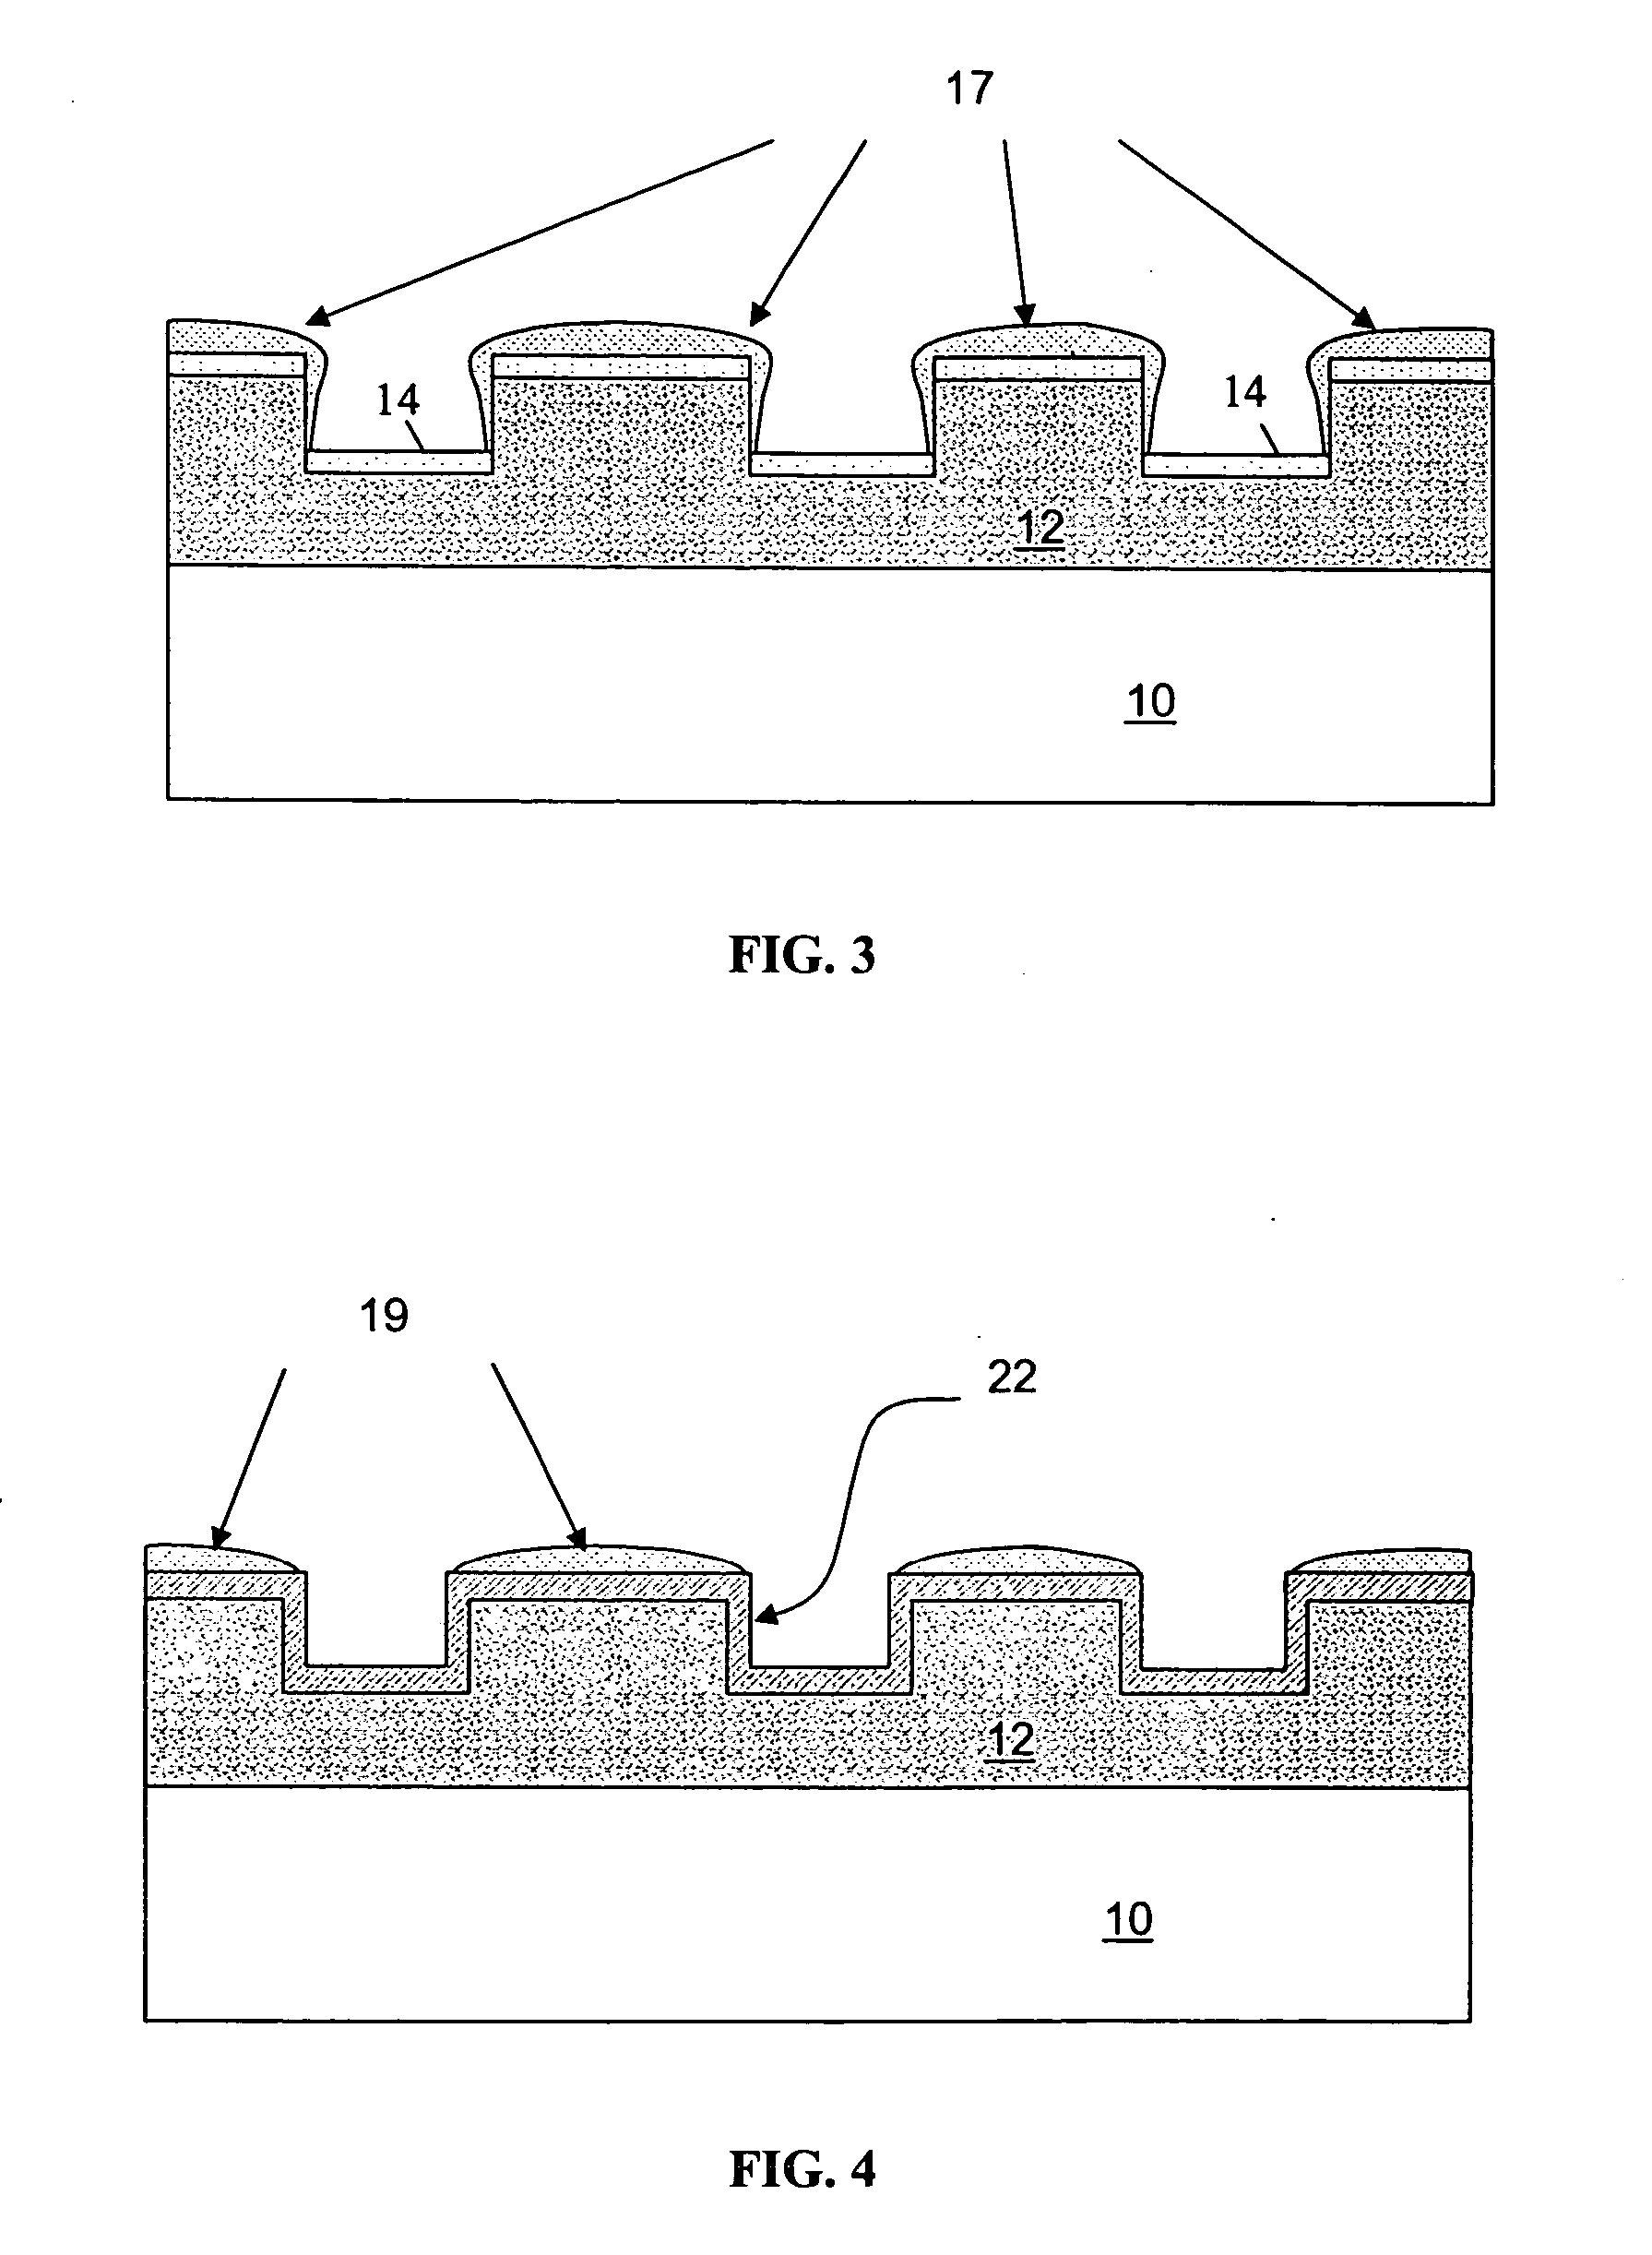 Method of forming a metal silicide layer on non-planar-topography polysilicon